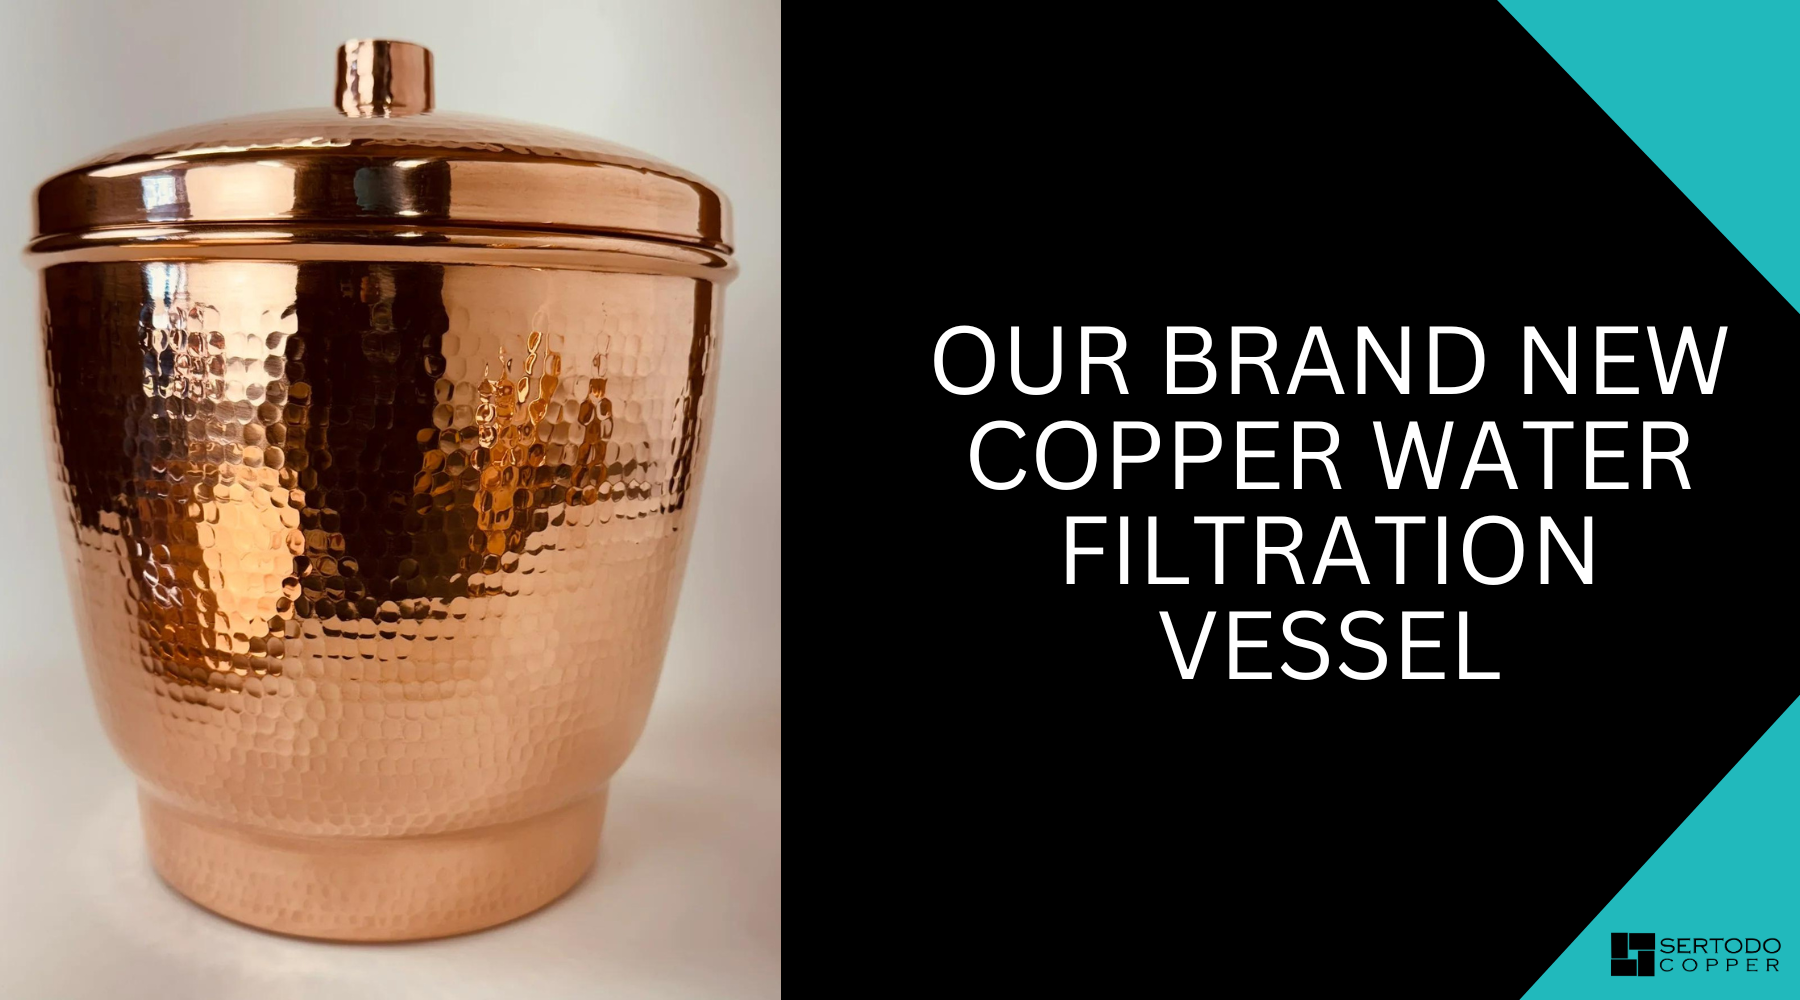 Our Brand New Copper Water Filtration Vessel